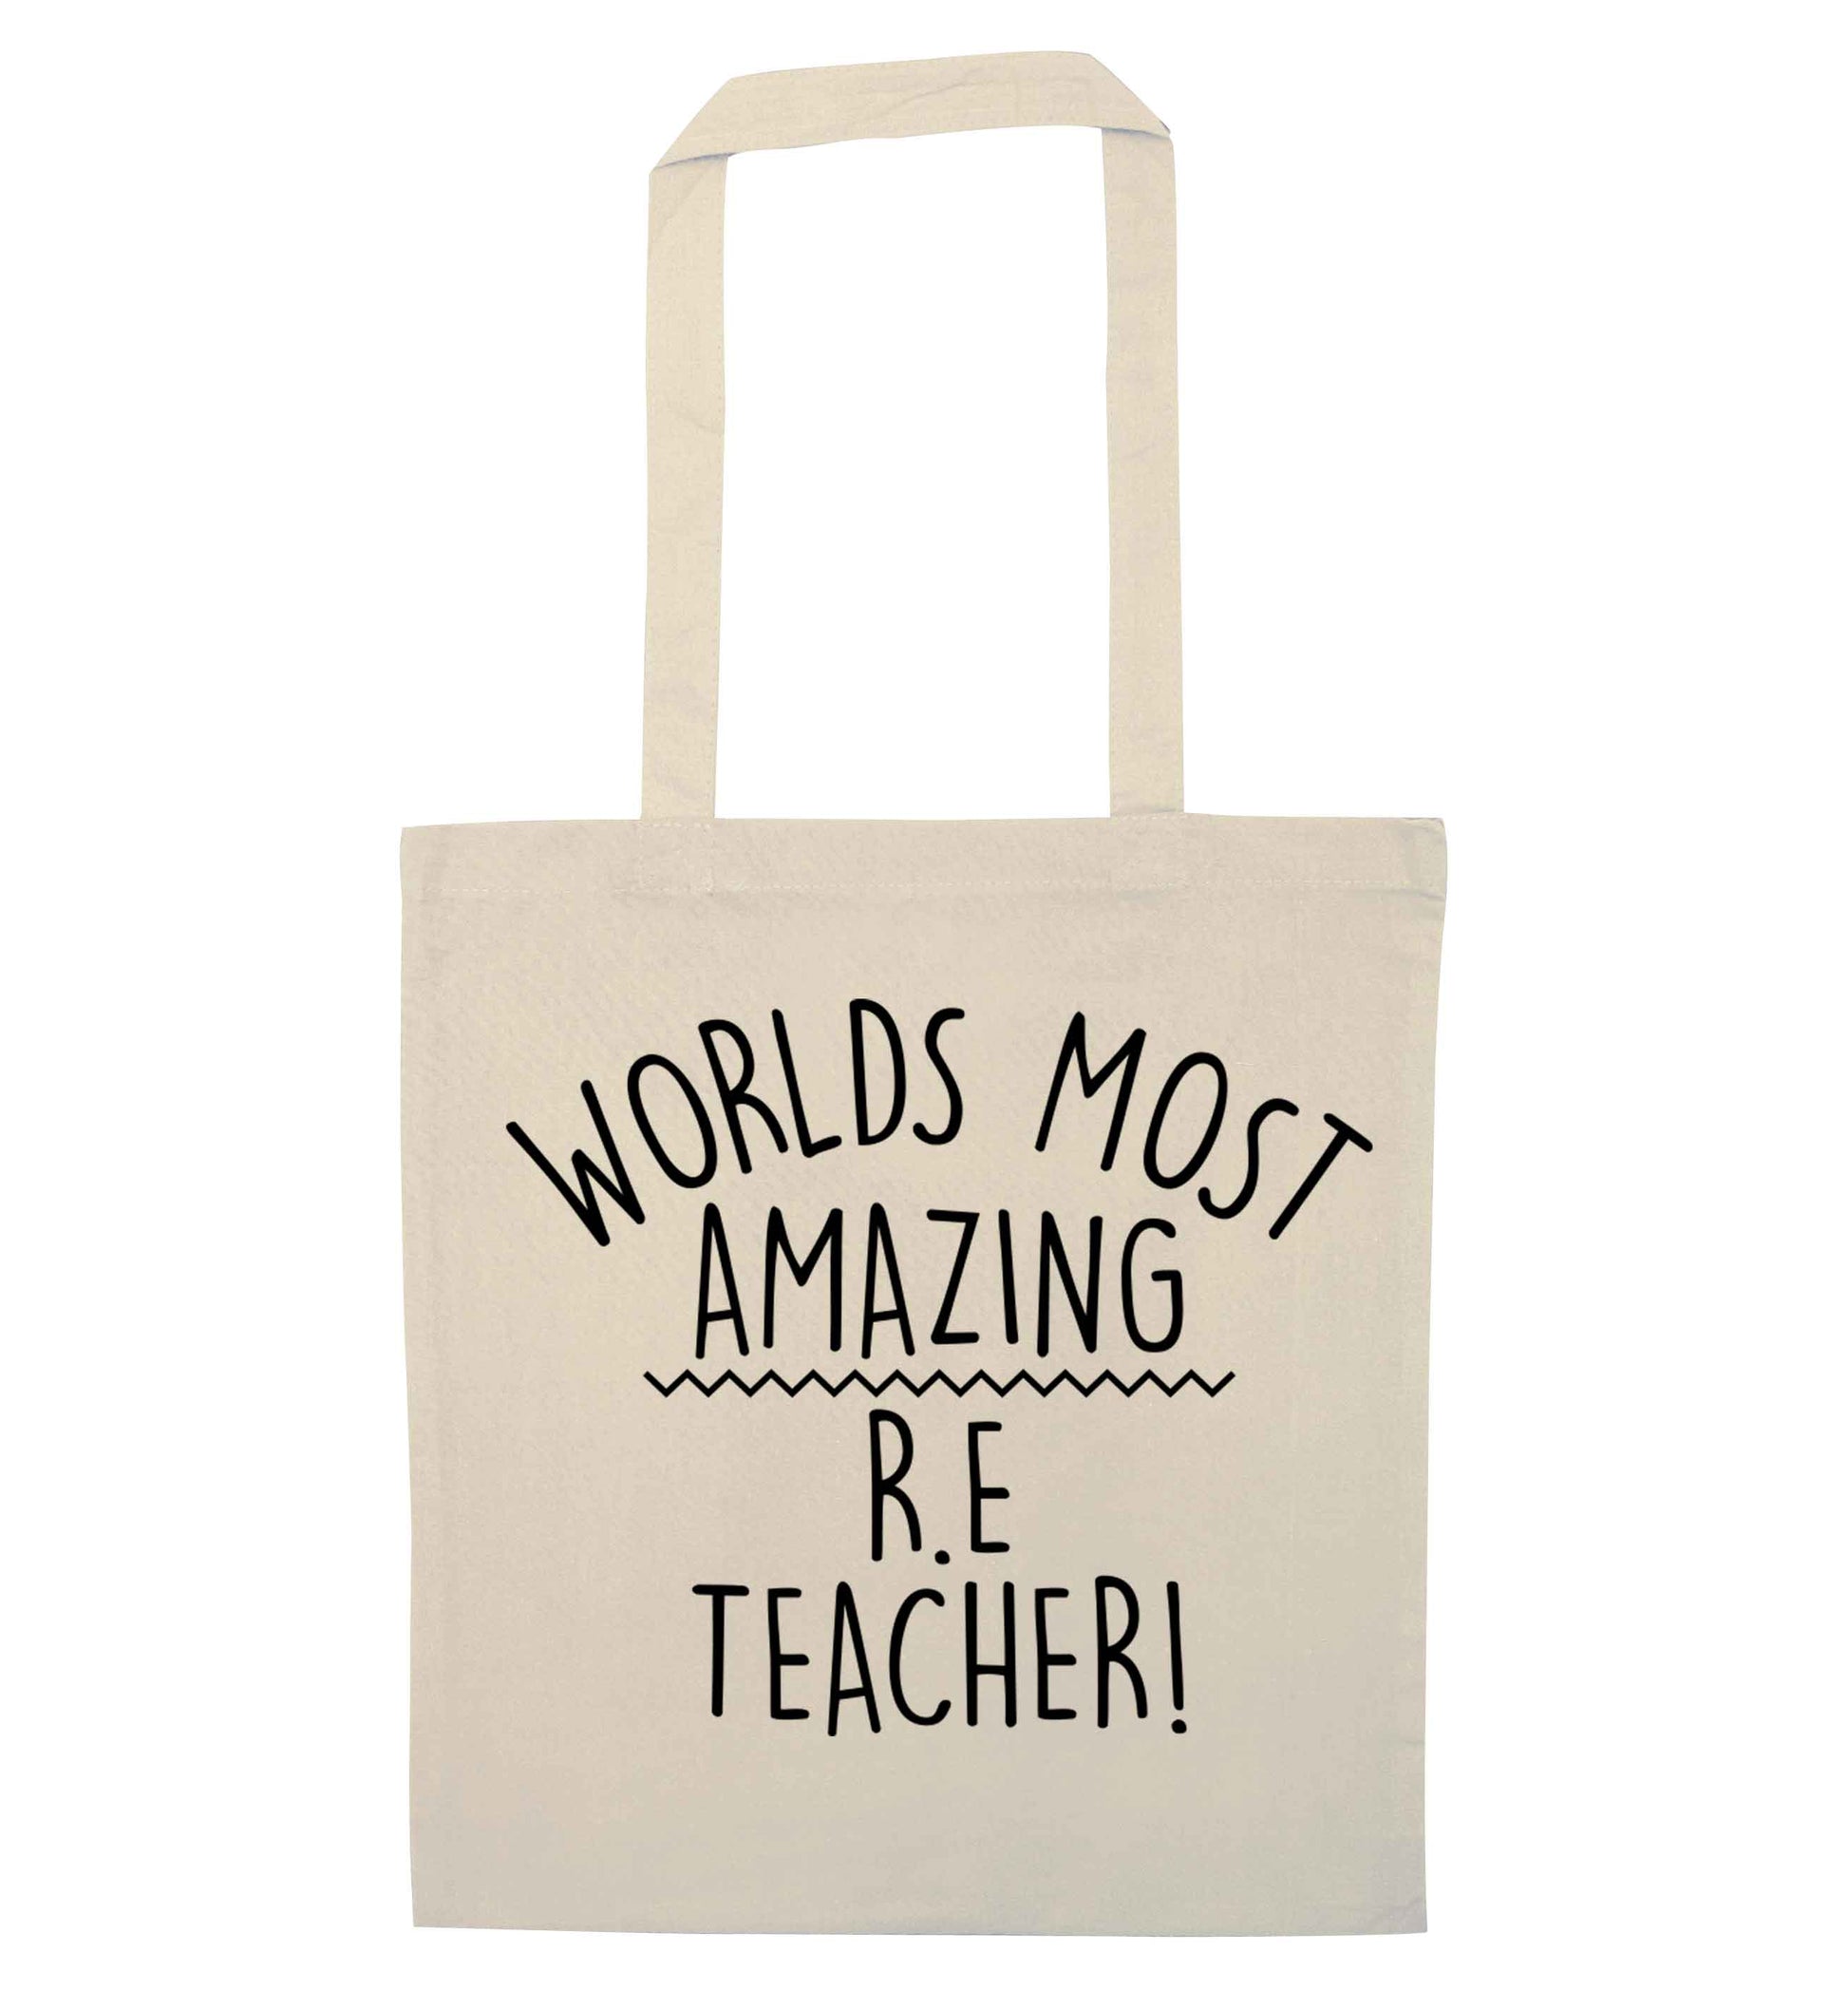 Worlds most amazing R.E teacher natural tote bag